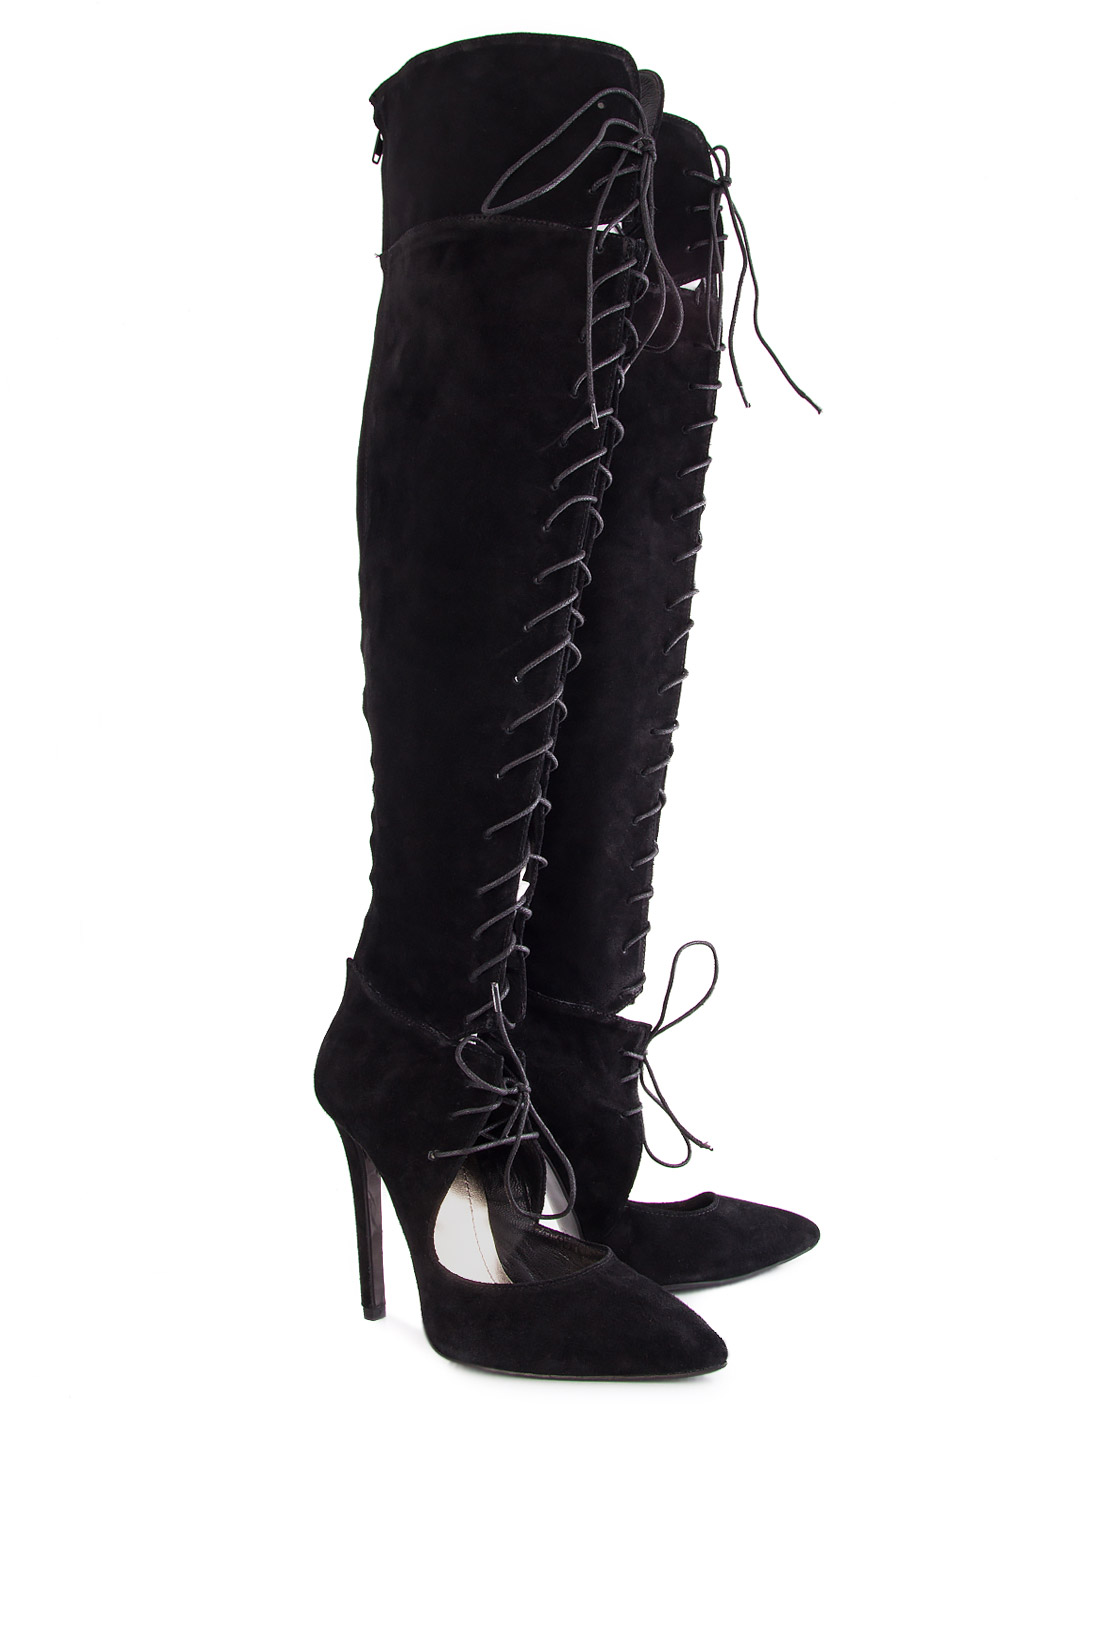 Cutout suede over-the-knee boots Ana Kaloni image 1